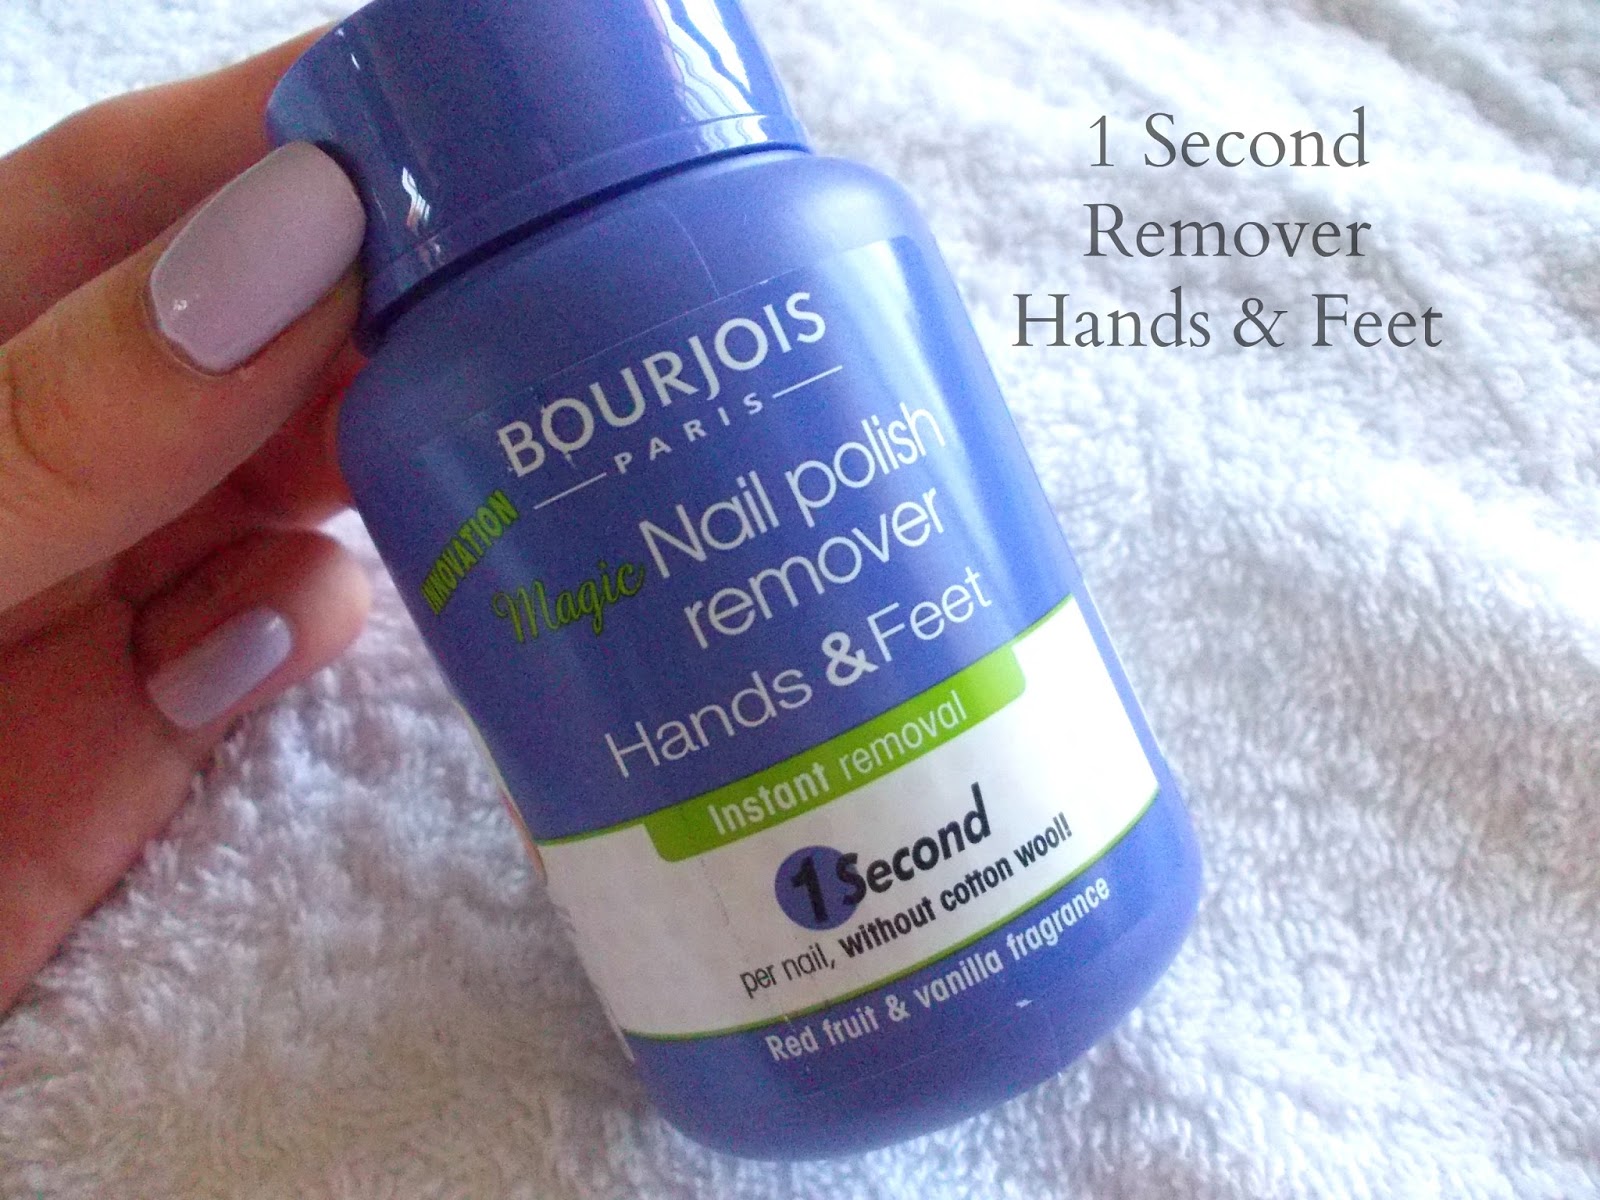 New: Bourjois Nail Polish Remover Pot for Hands & FEET